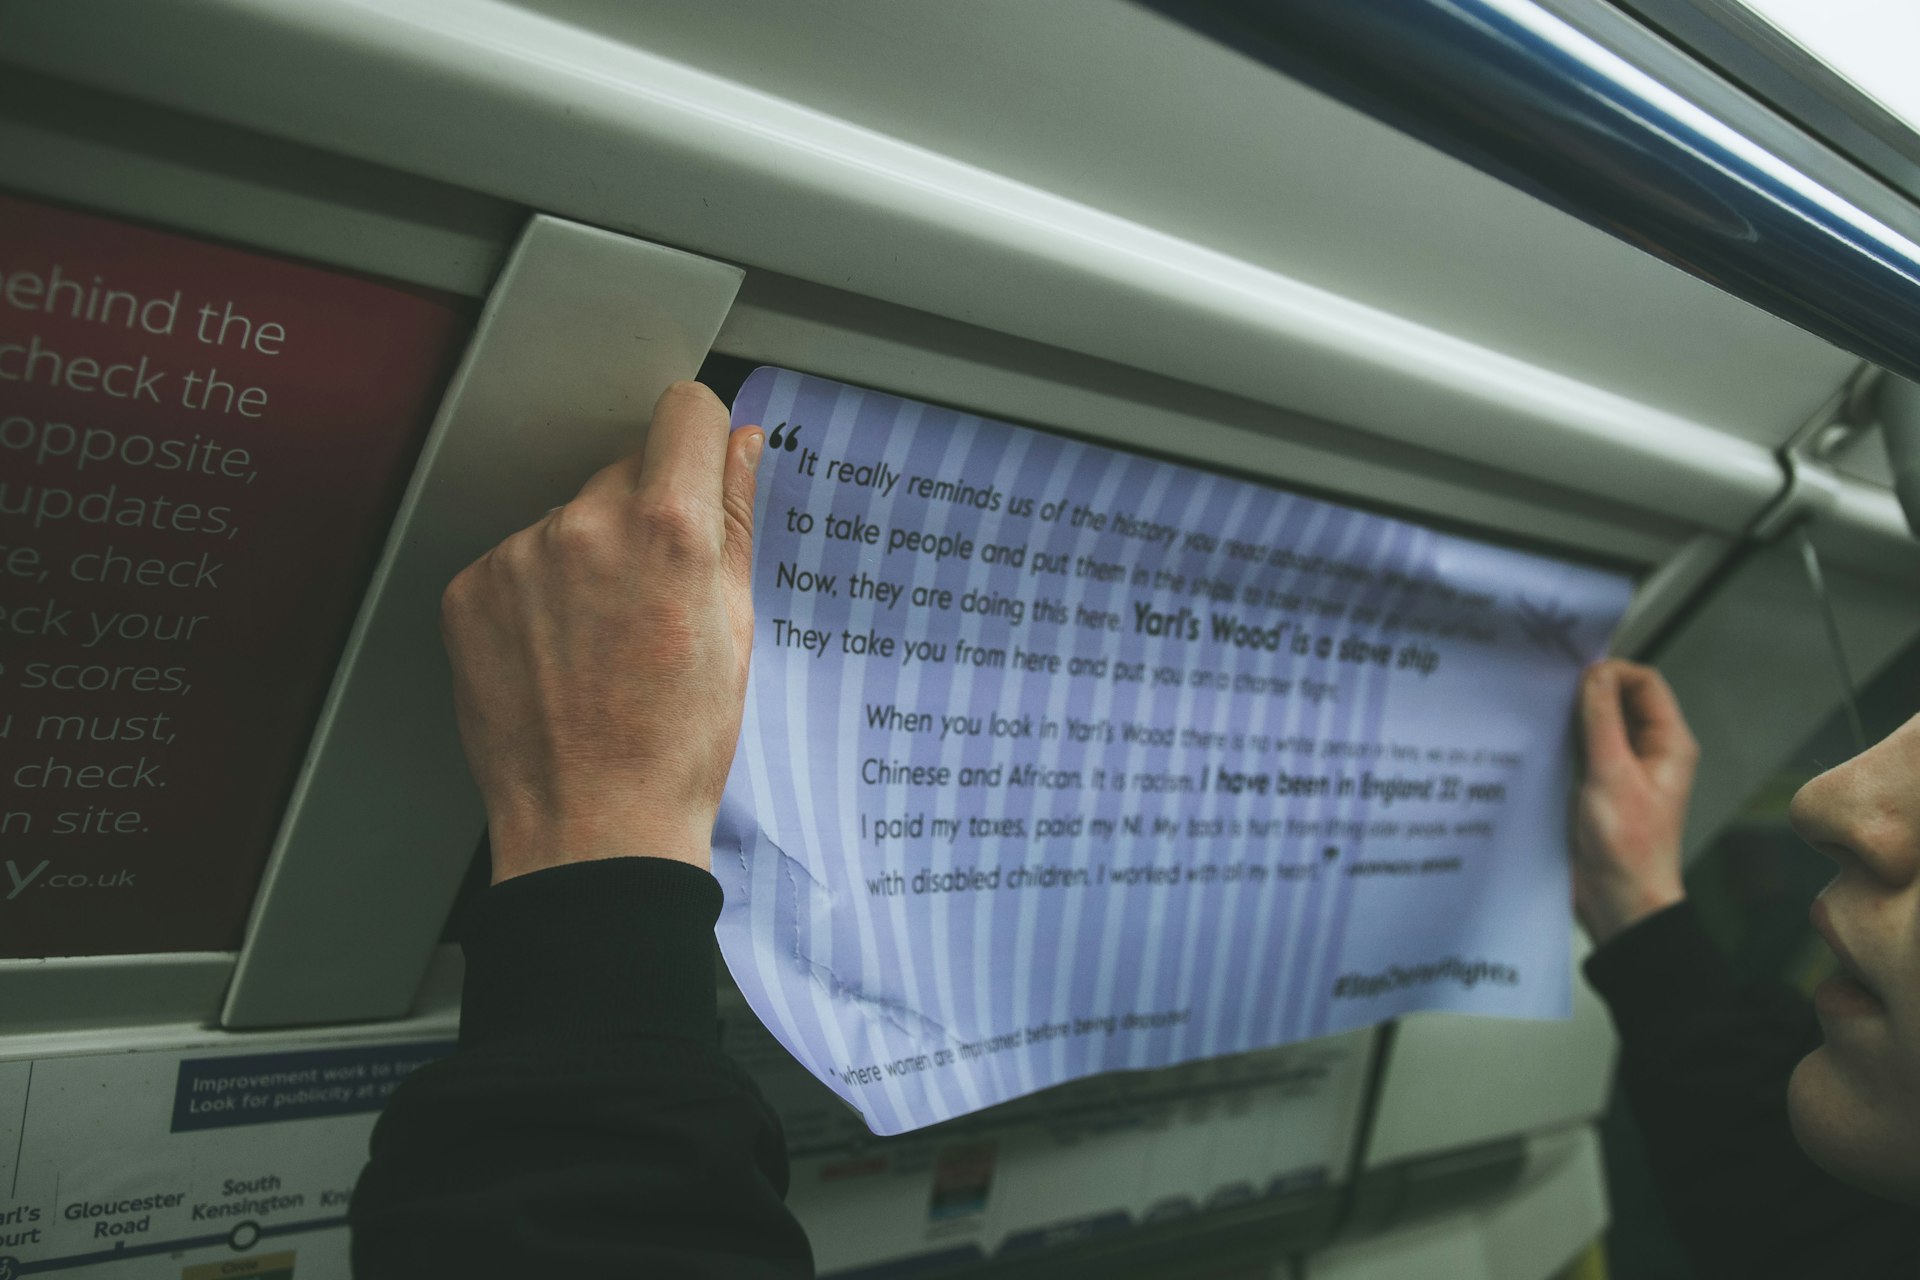 We tagged along with activists ad-hacking the tube